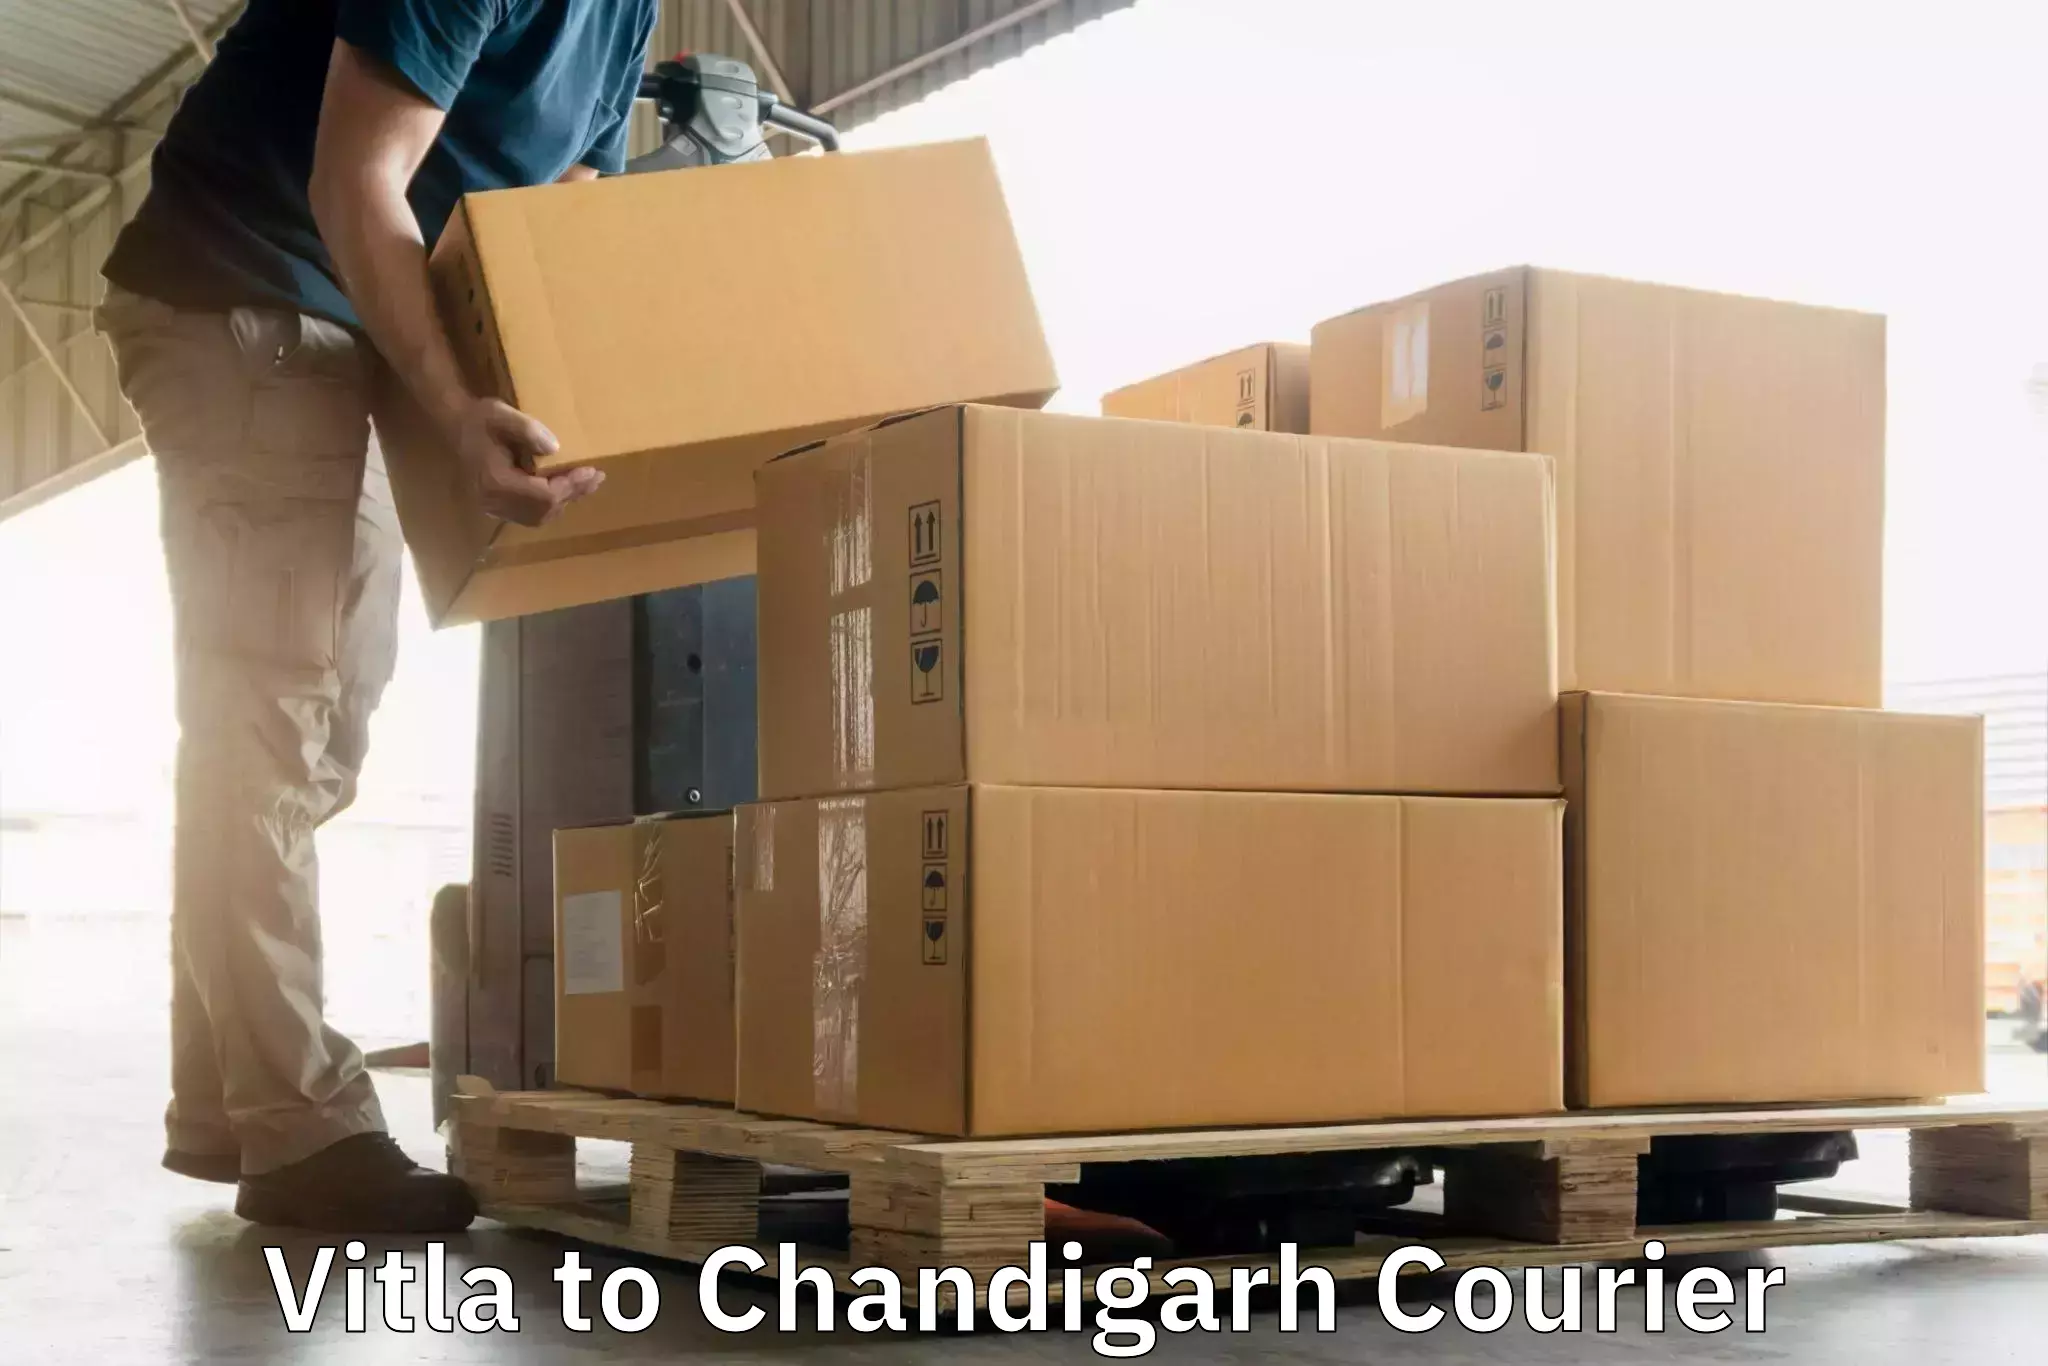 24-hour courier services Vitla to Chandigarh